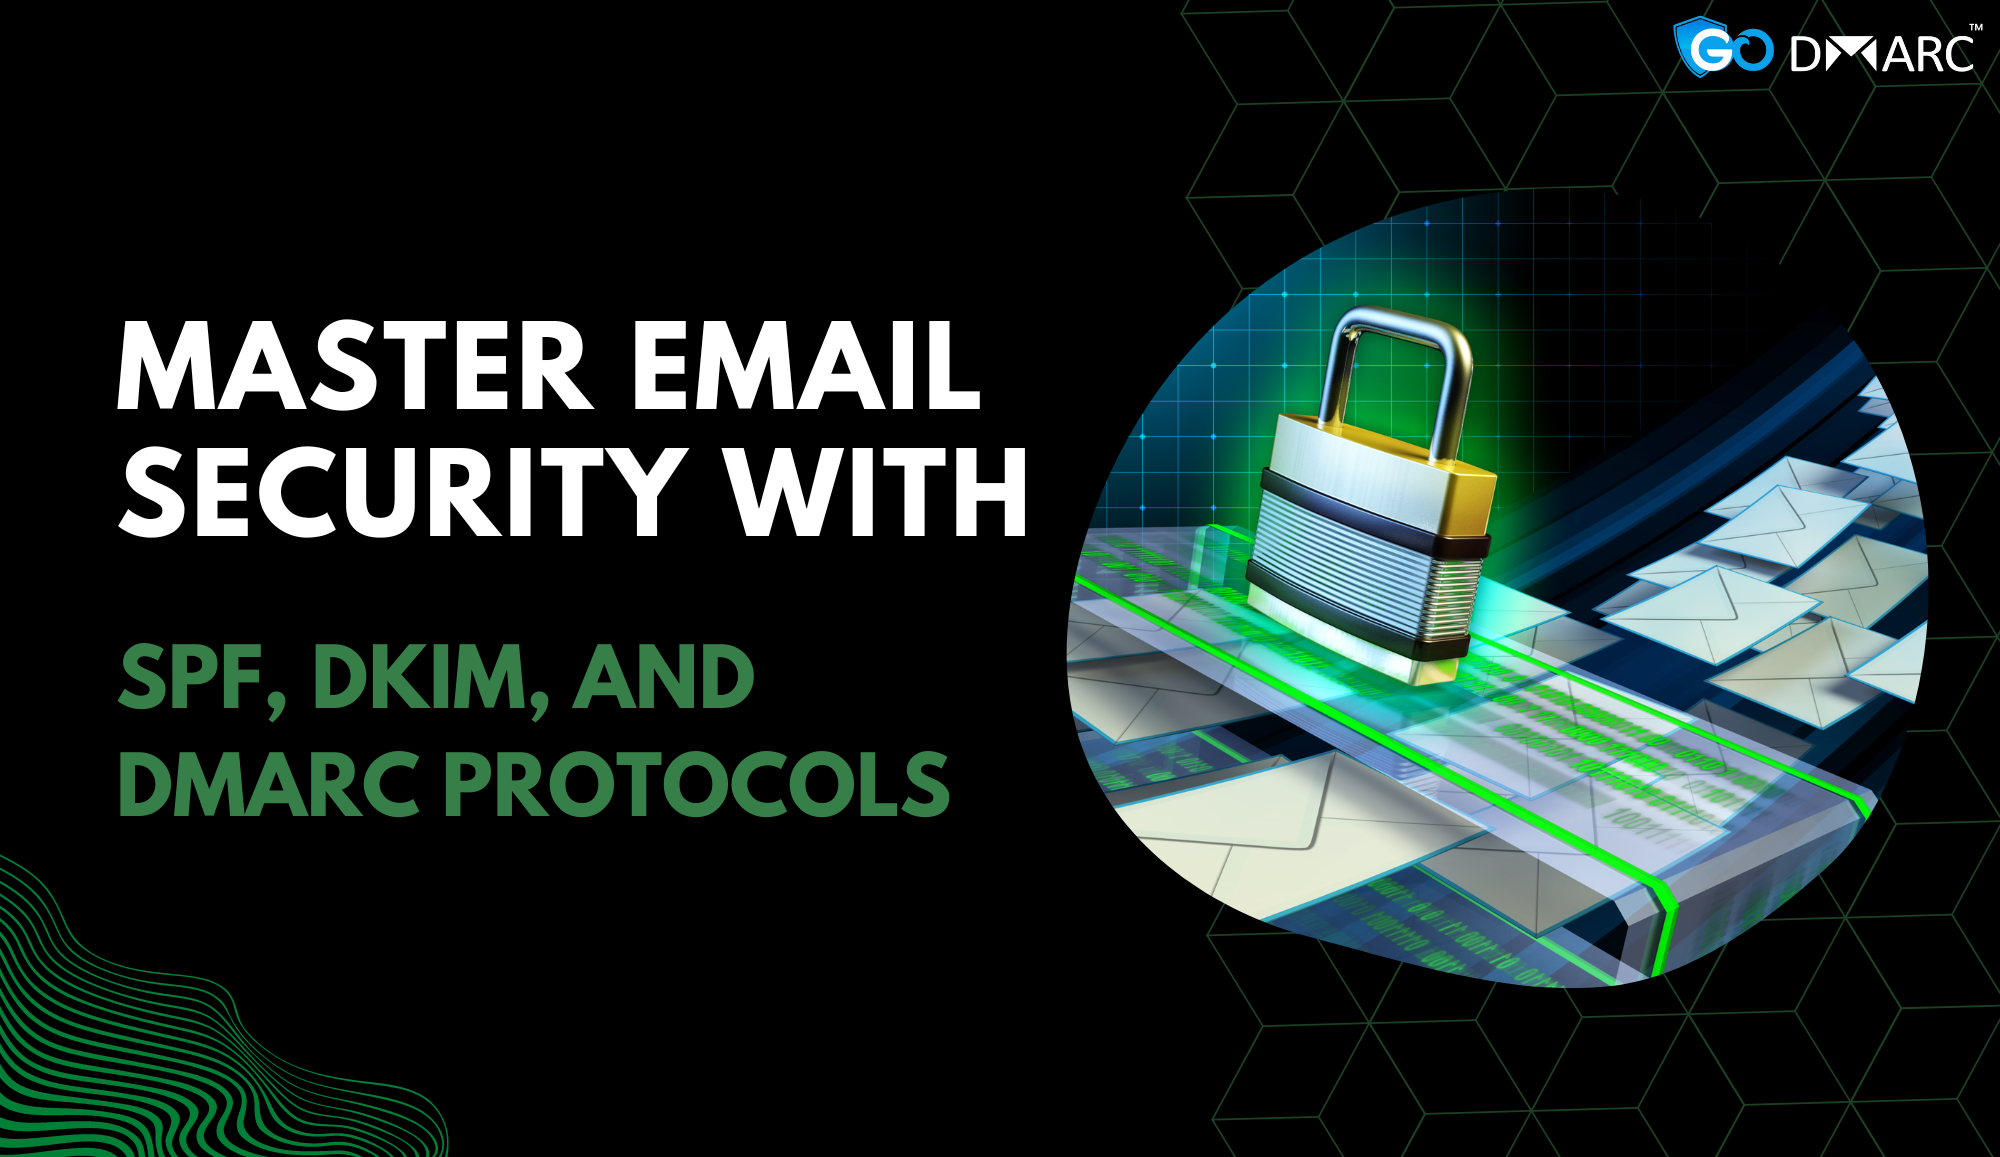 master email security with dmarc protocols